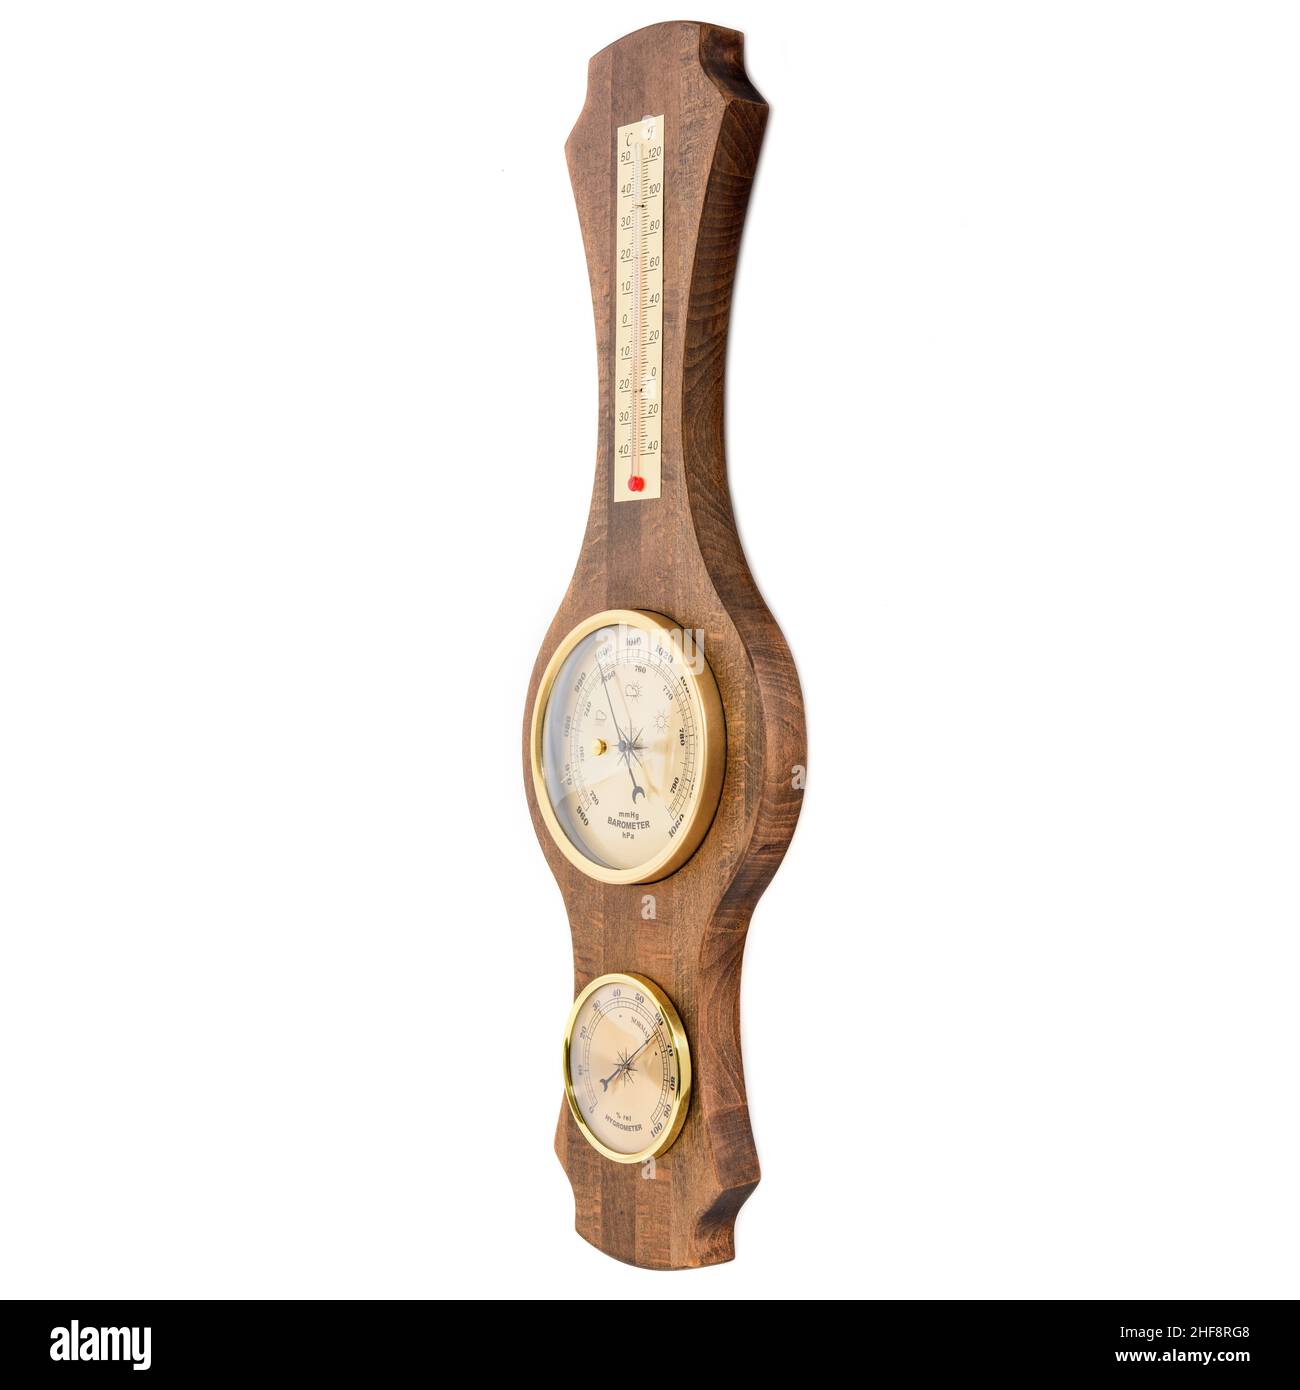 https://c8.alamy.com/comp/2HF8RG8/vintage-wooden-clock-with-barometer-and-old-marine-style-thermometer-on-a-white-background-wall-decor-for-the-interior-2HF8RG8.jpg